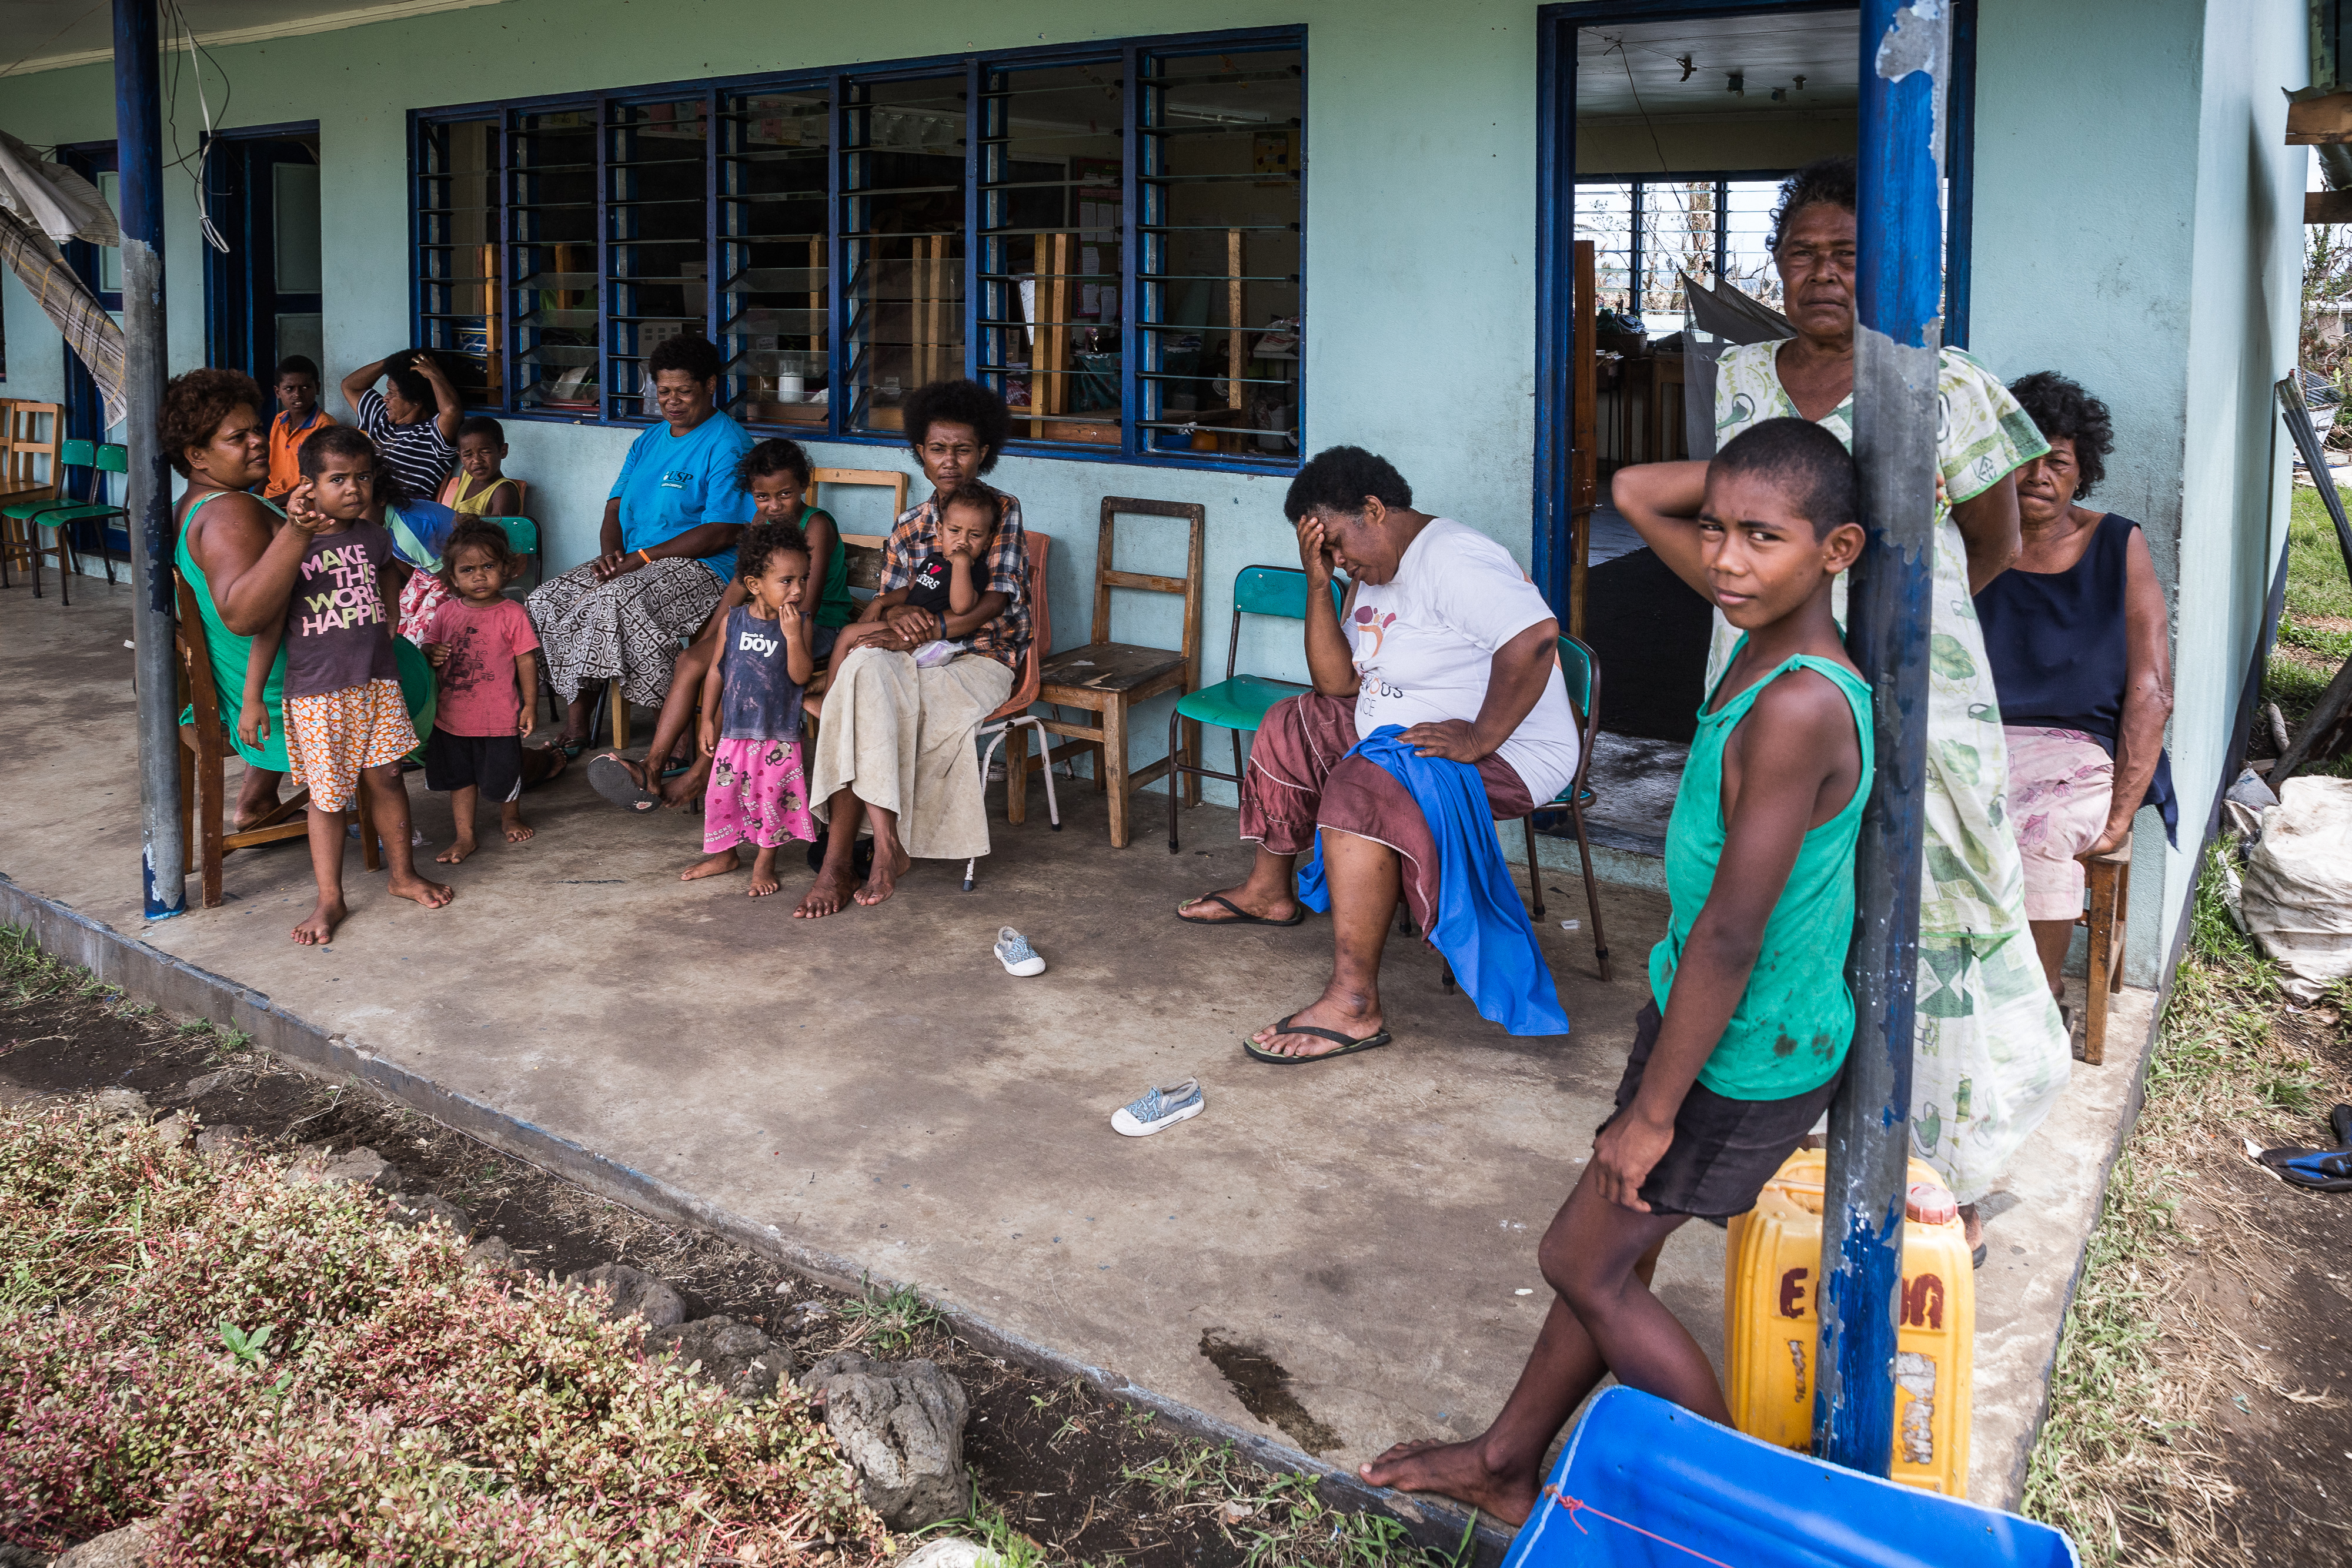 Many families of Vuna village living in a classroom of Vuna District School that serves now as an evacuation centre for survivors of Cyclone Winston. 